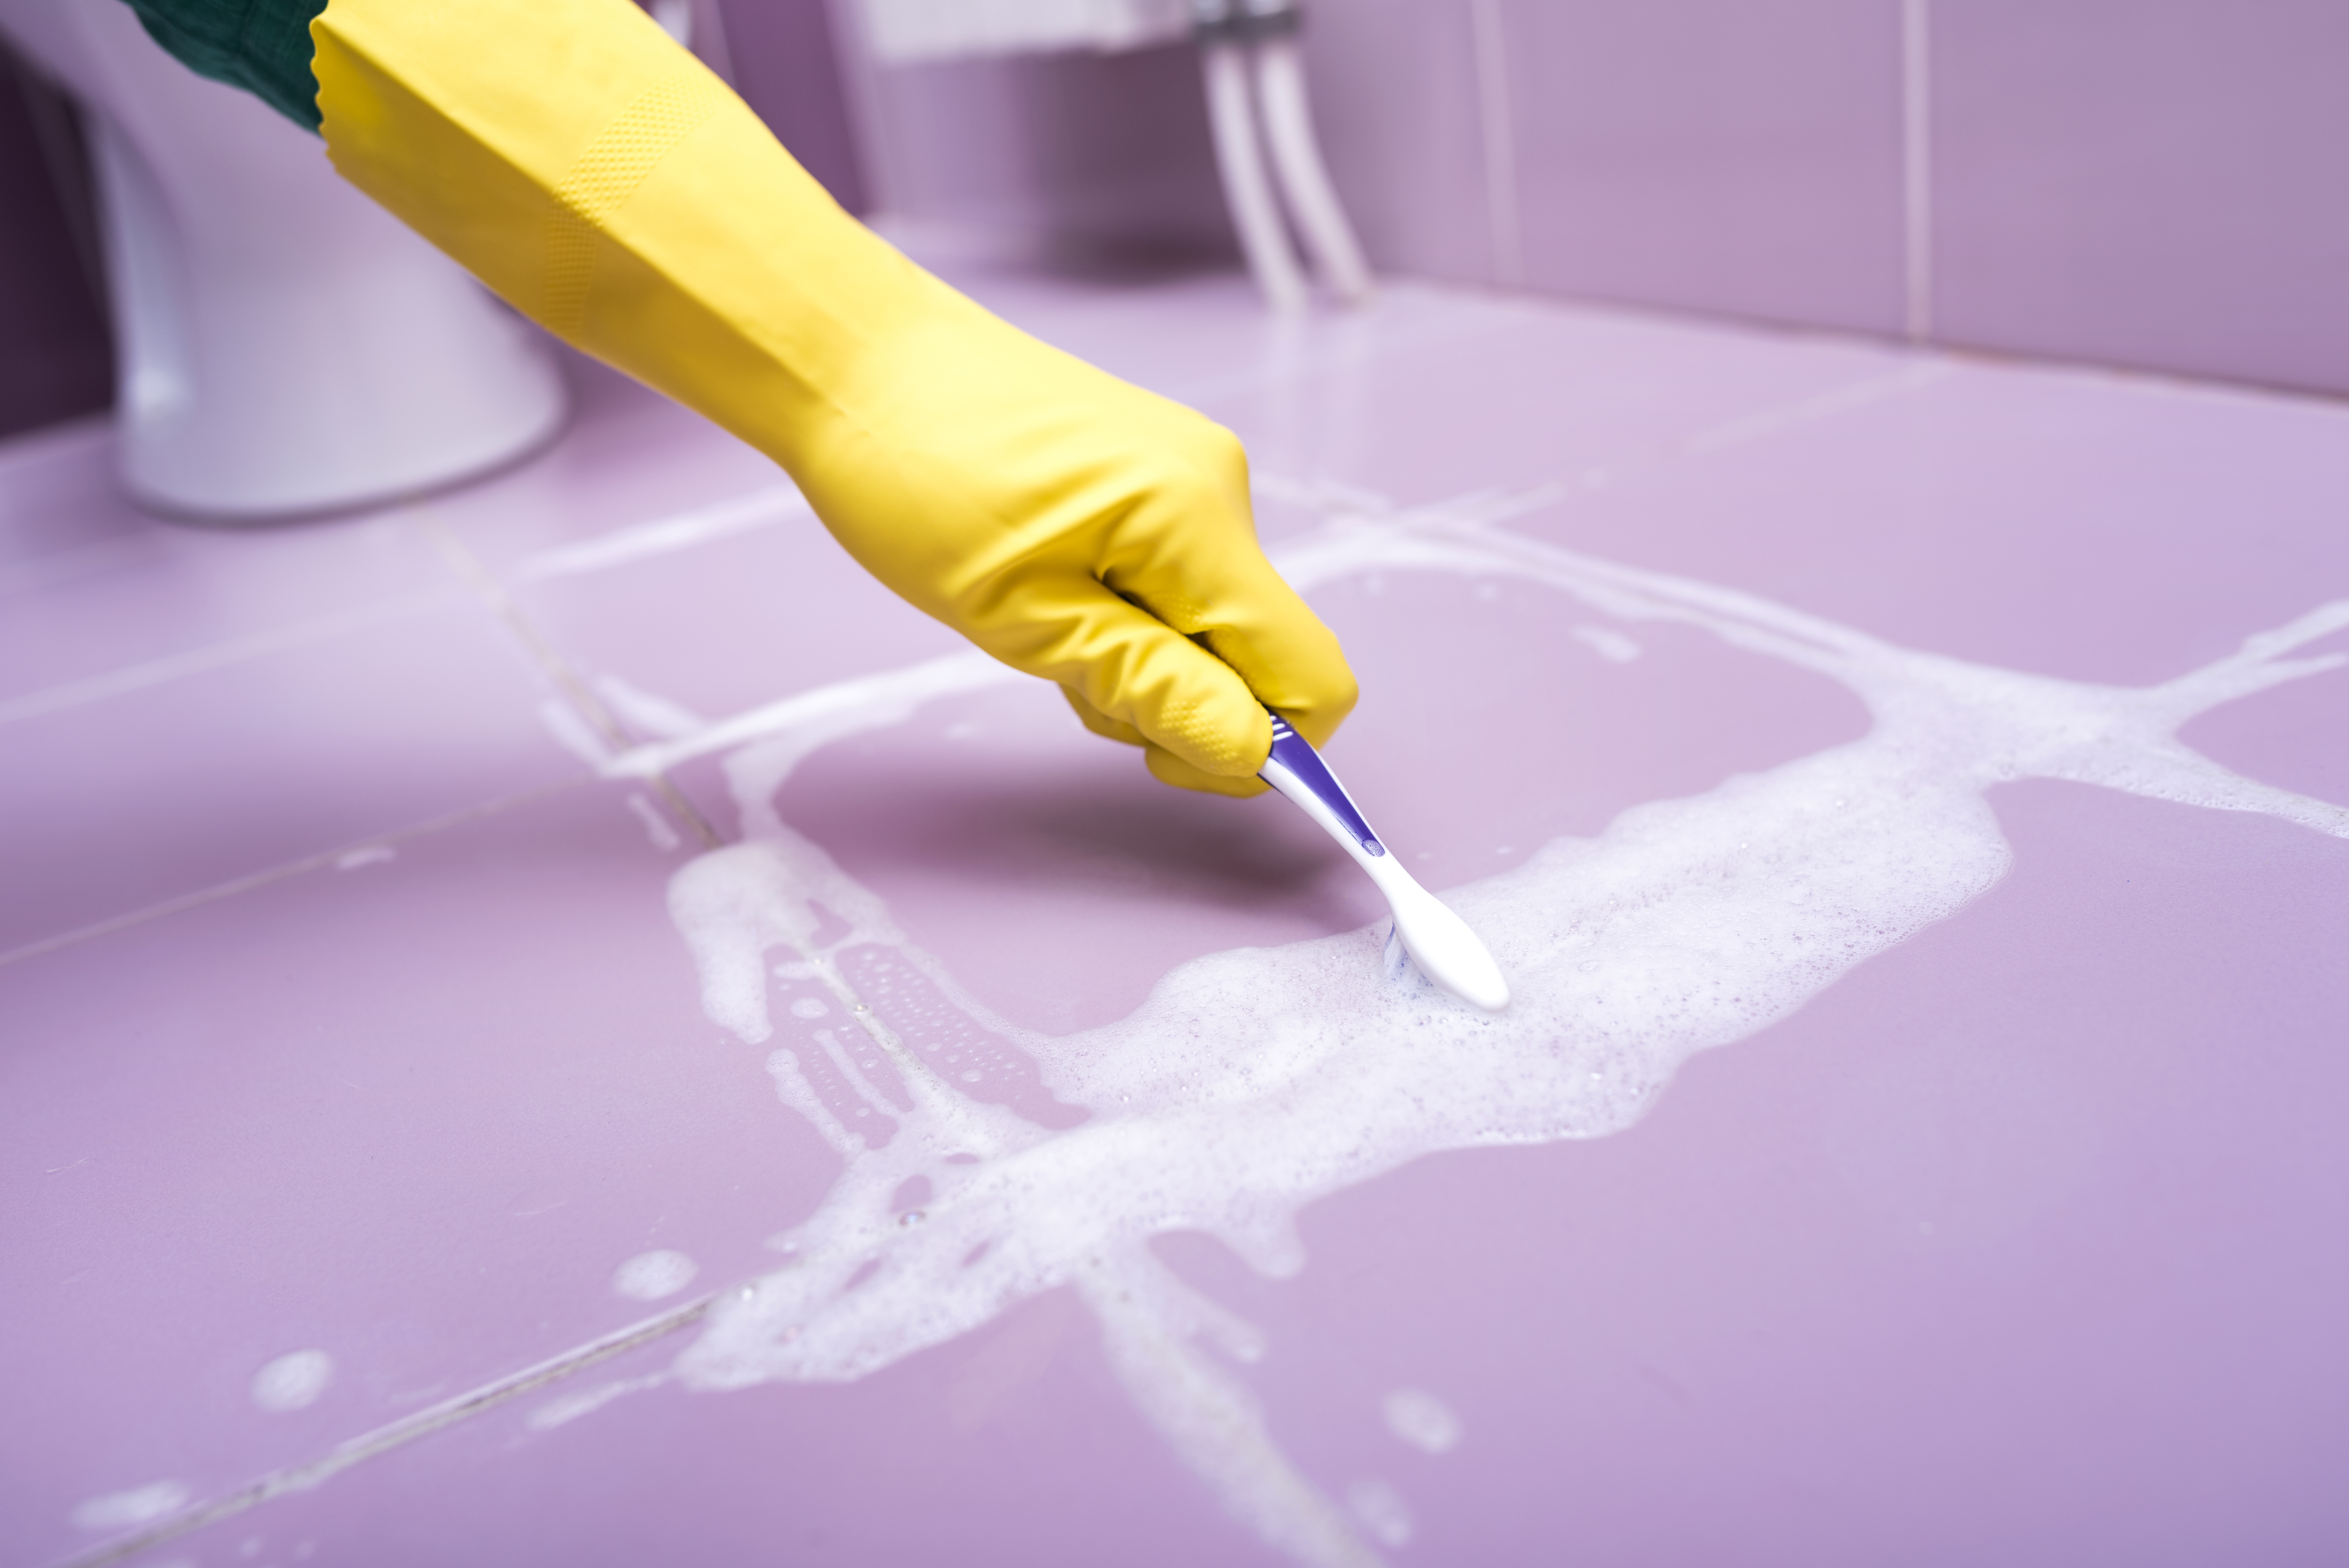 10 Ways To Clean with Hydrogen Peroxide for a Guest-Ready Home